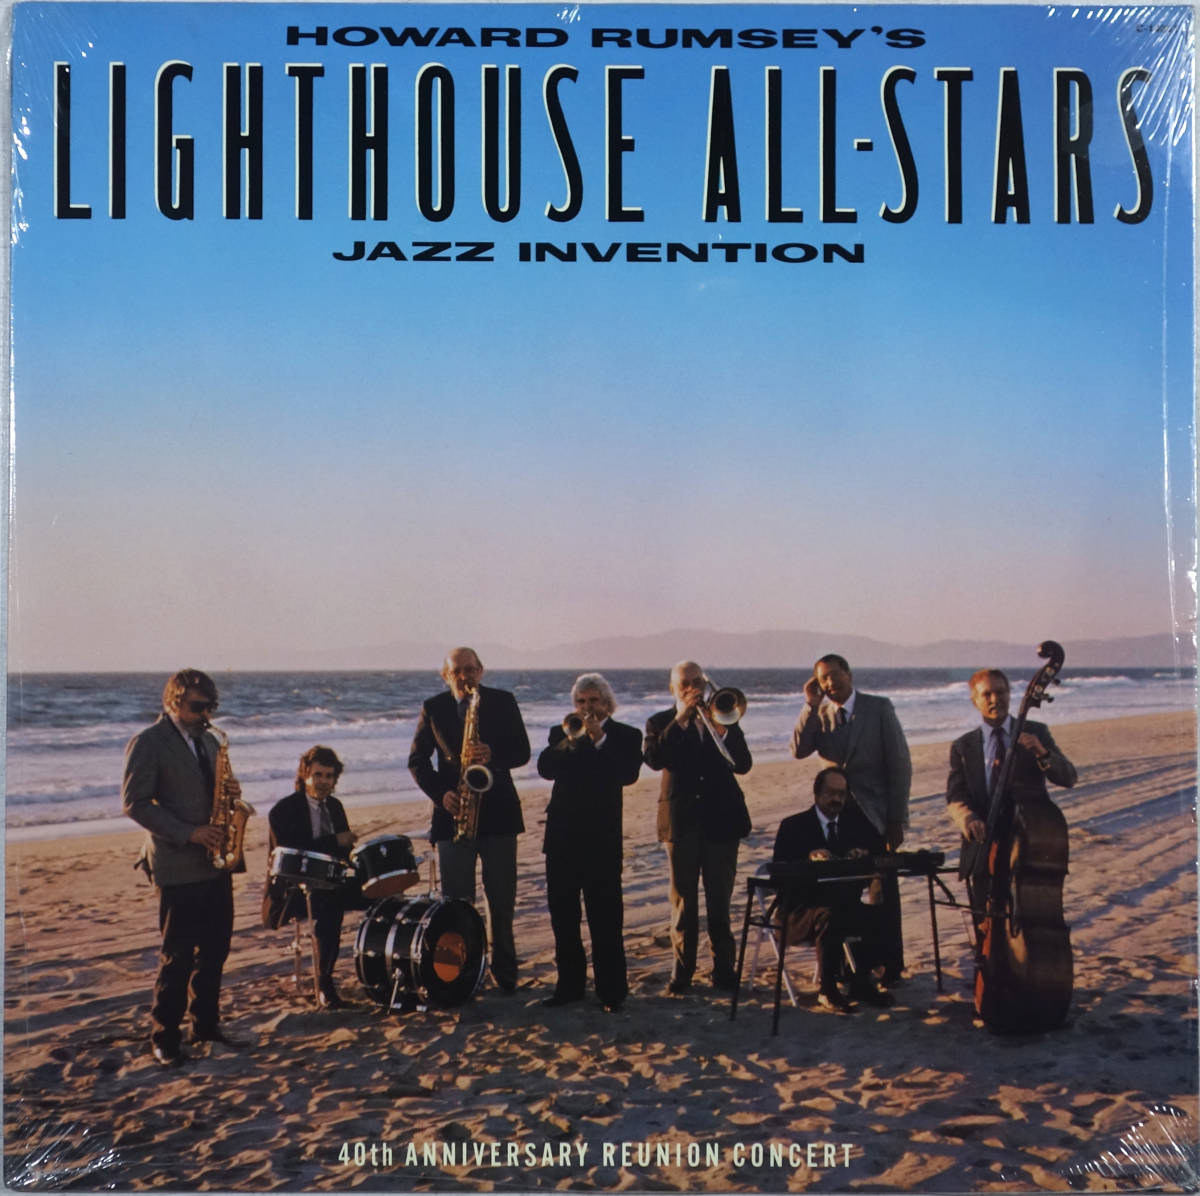 ◆HOWARD RUMSEY'S LIGHTHOUSE ALL-STARS/JAZZ INVENTION (US LP/Sealed) -Bud Shank, Conte Candoli, Claude Williamson, Monty Budwig_画像1